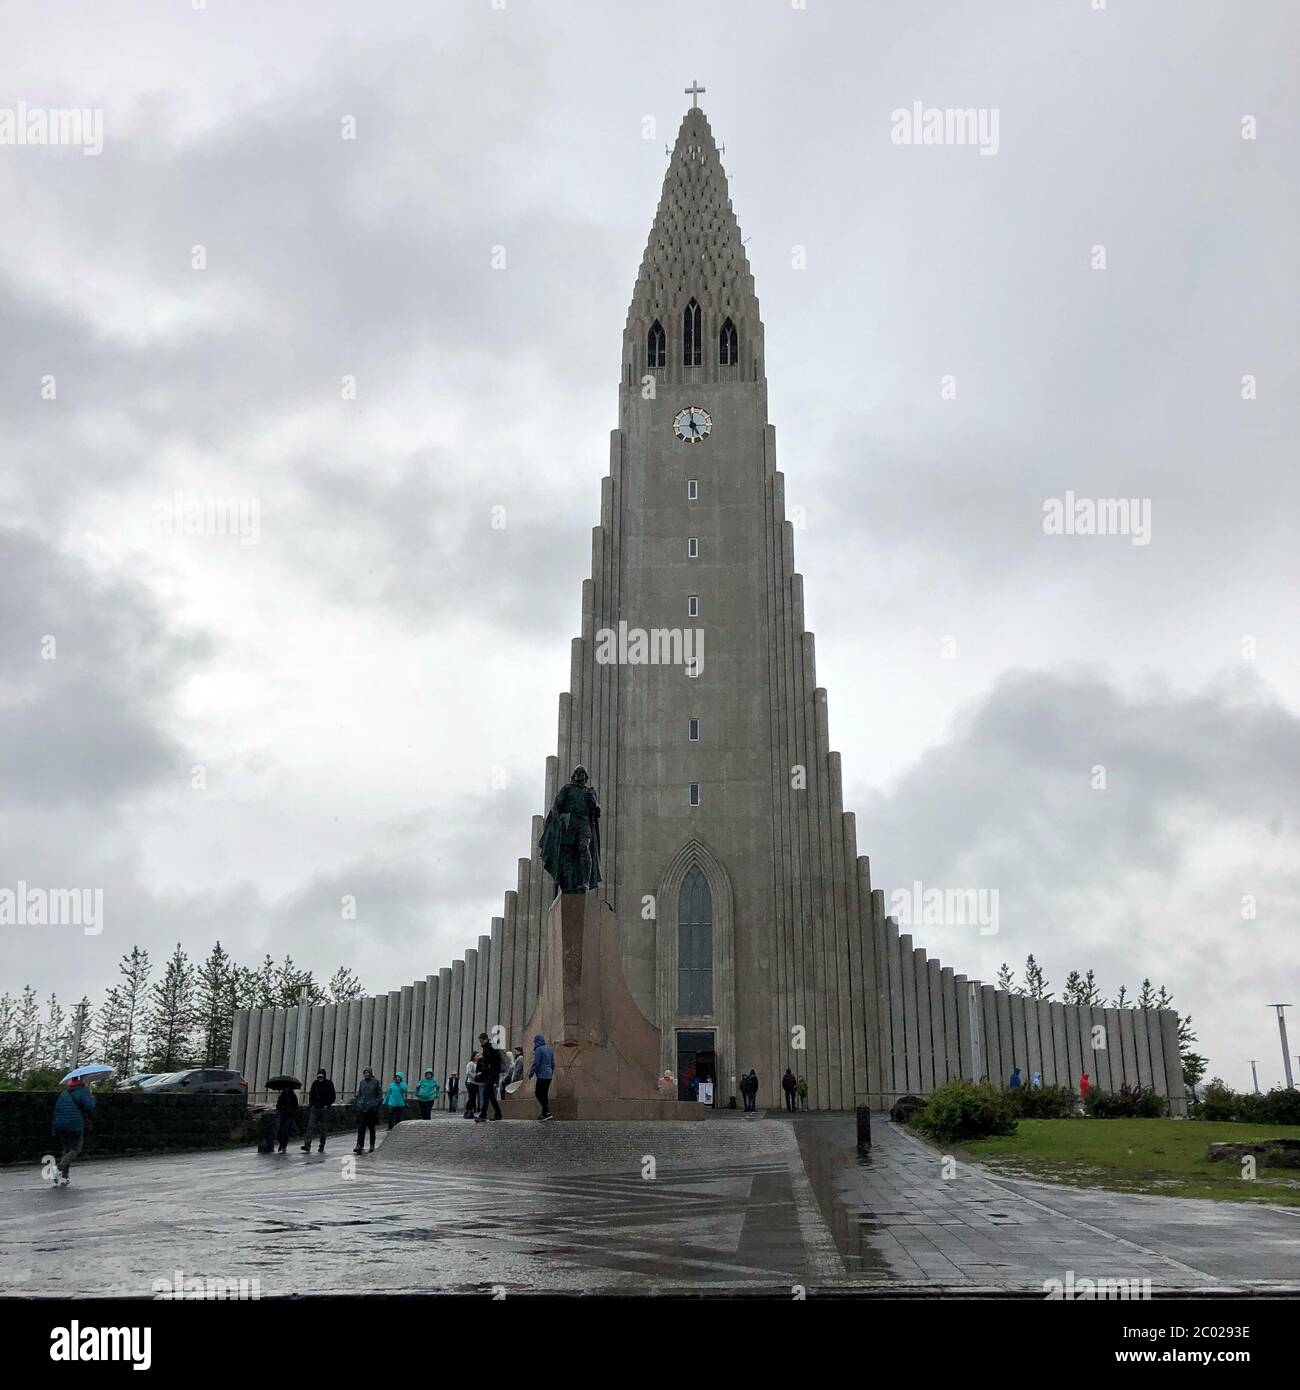 REYKJAVIK, ICELAND - June 30, 2018: Hallgrimskirkja, a Lutheran parish church with Leif Erikson stature and people on cloudy sky. Cathedral building w Stock Photo